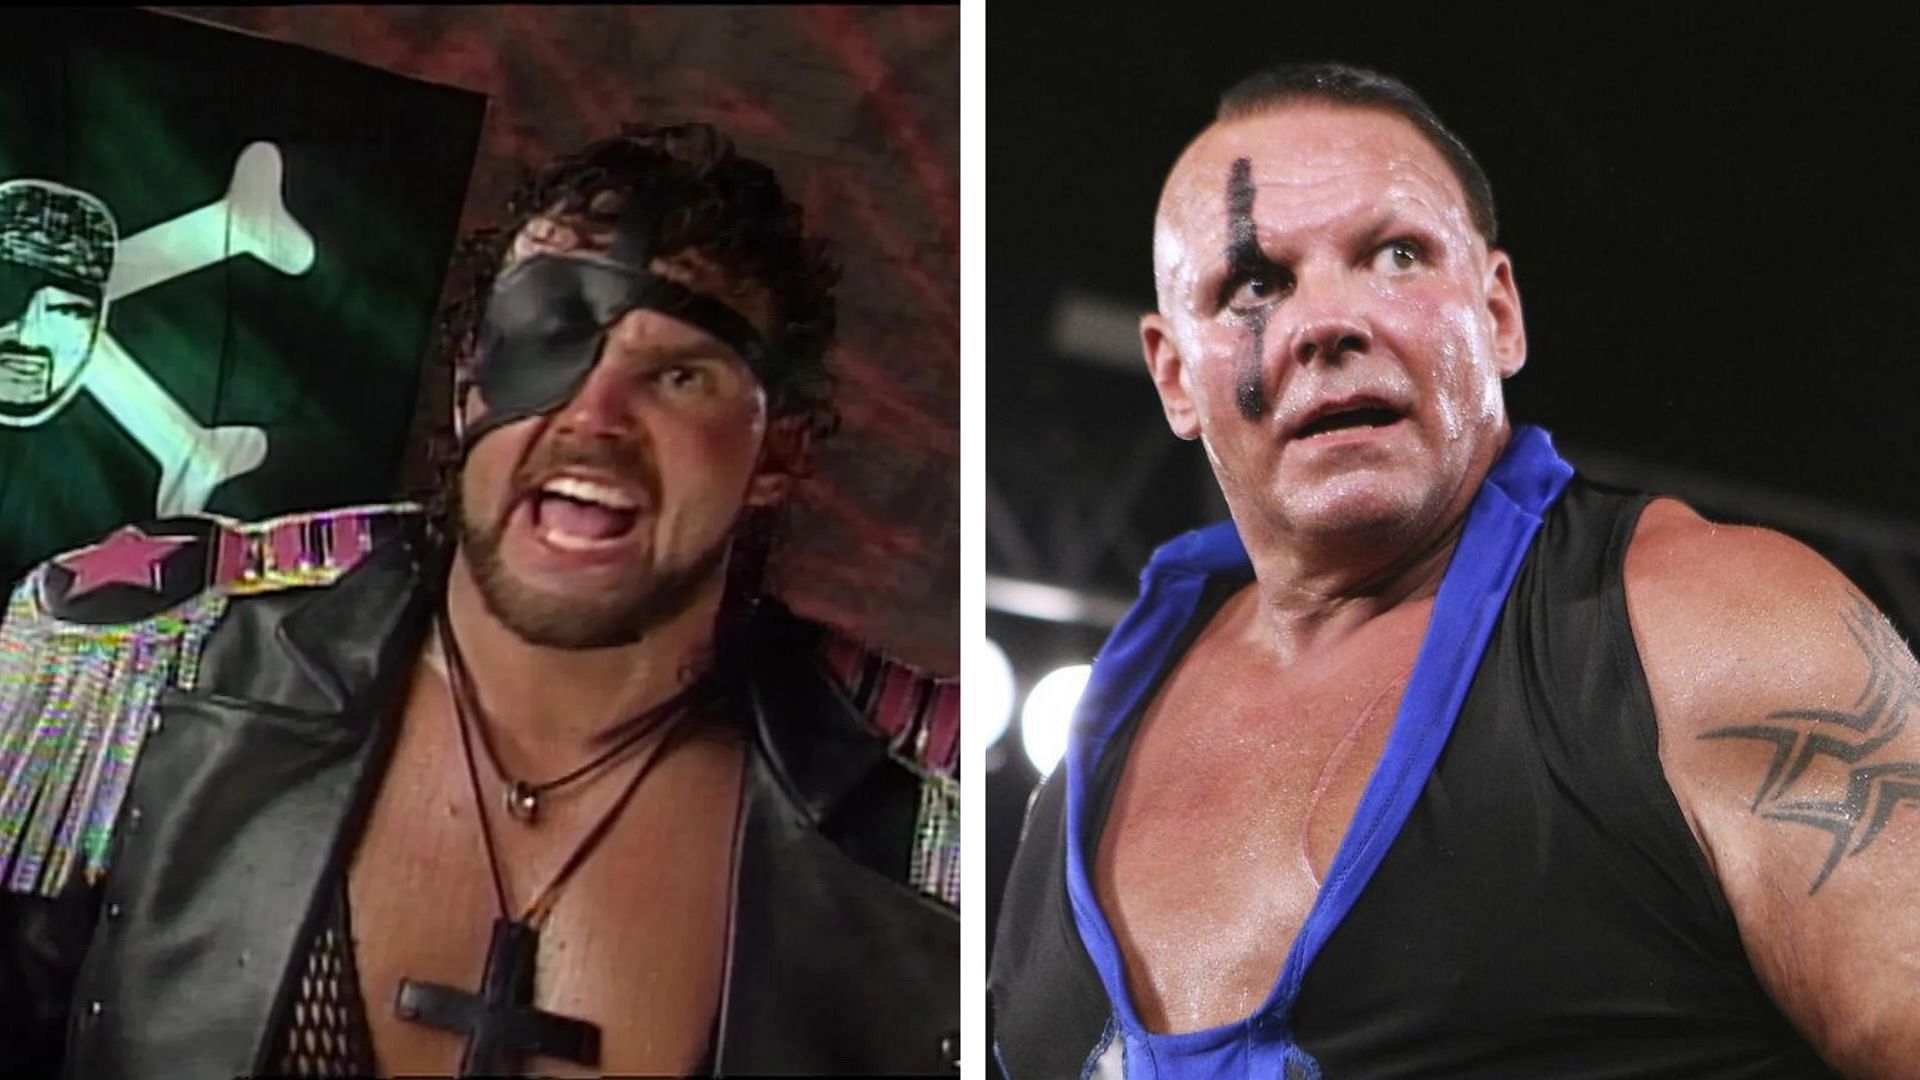 PCO before and after his time in World Wrestling Entertainment